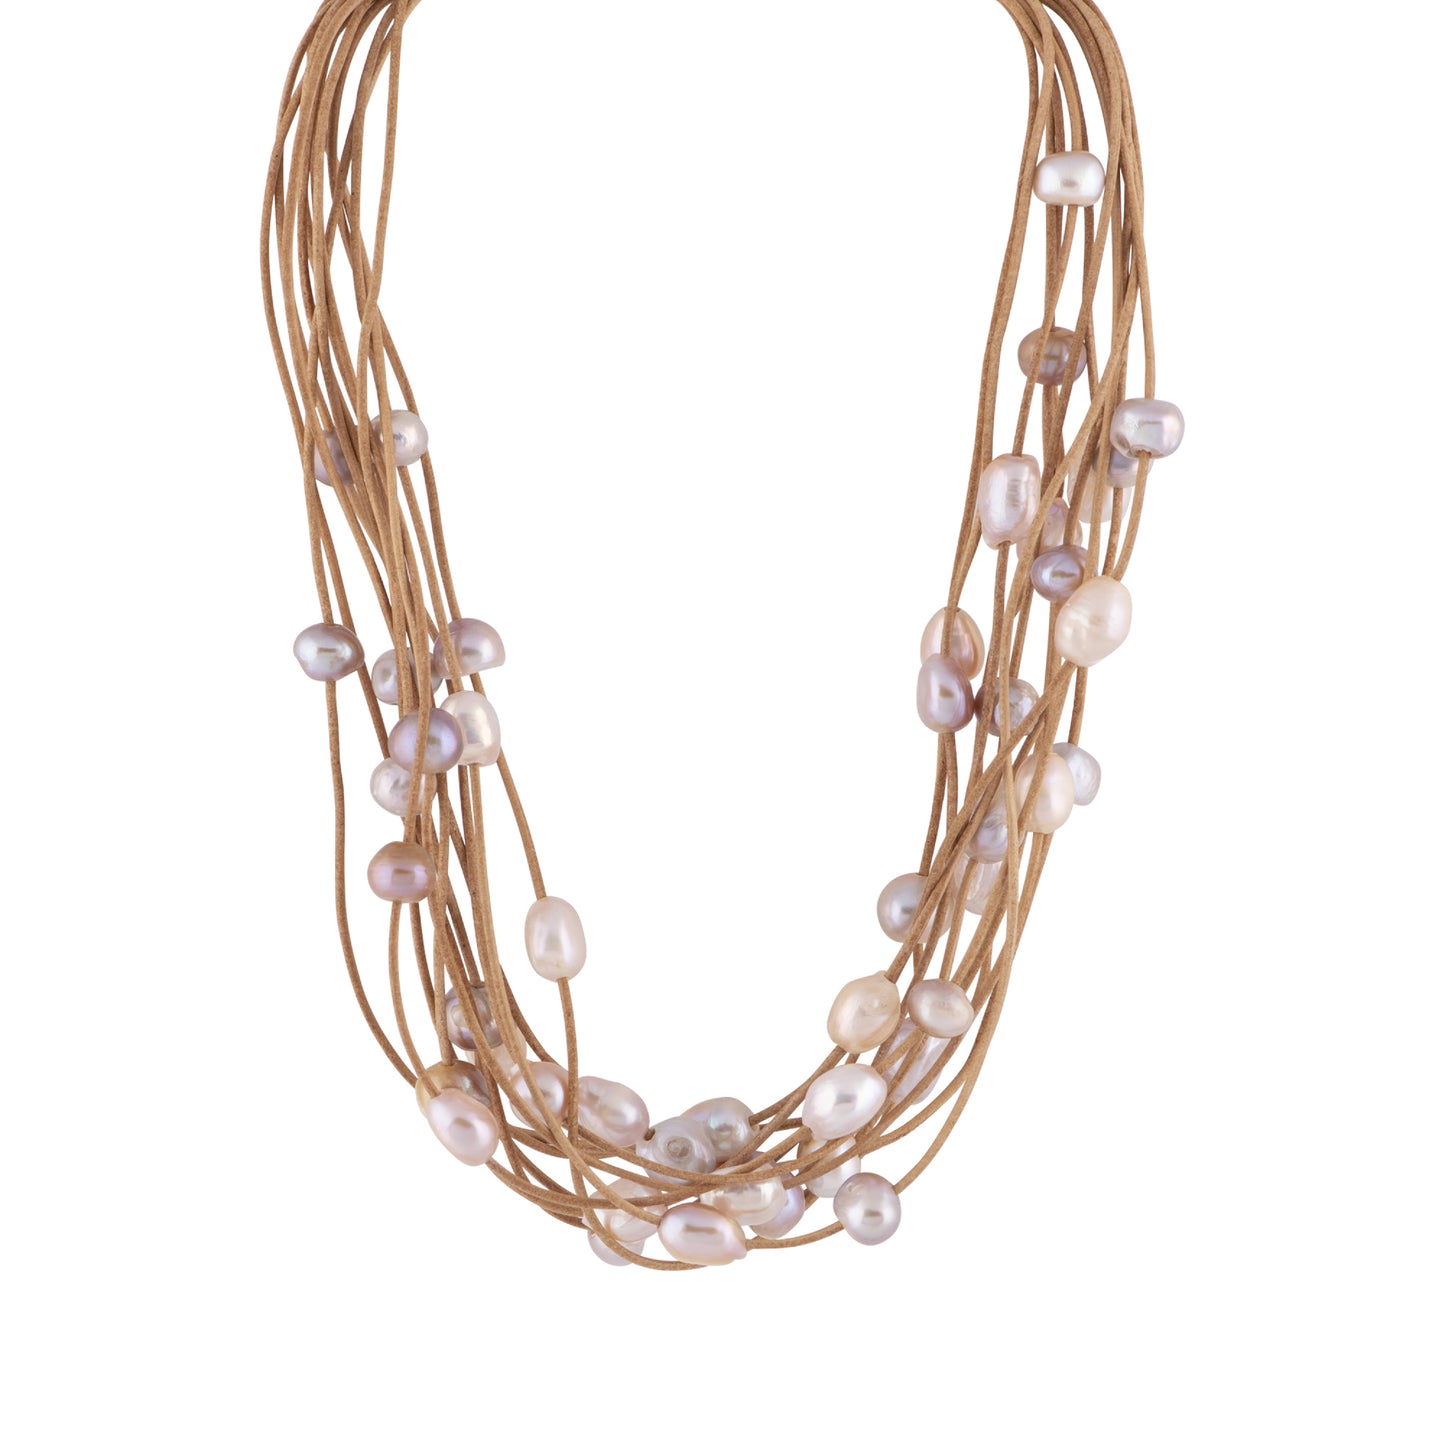 Marrianne - Leather multi-strand freshwater pearl necklace (Tan strand, natural pearls)